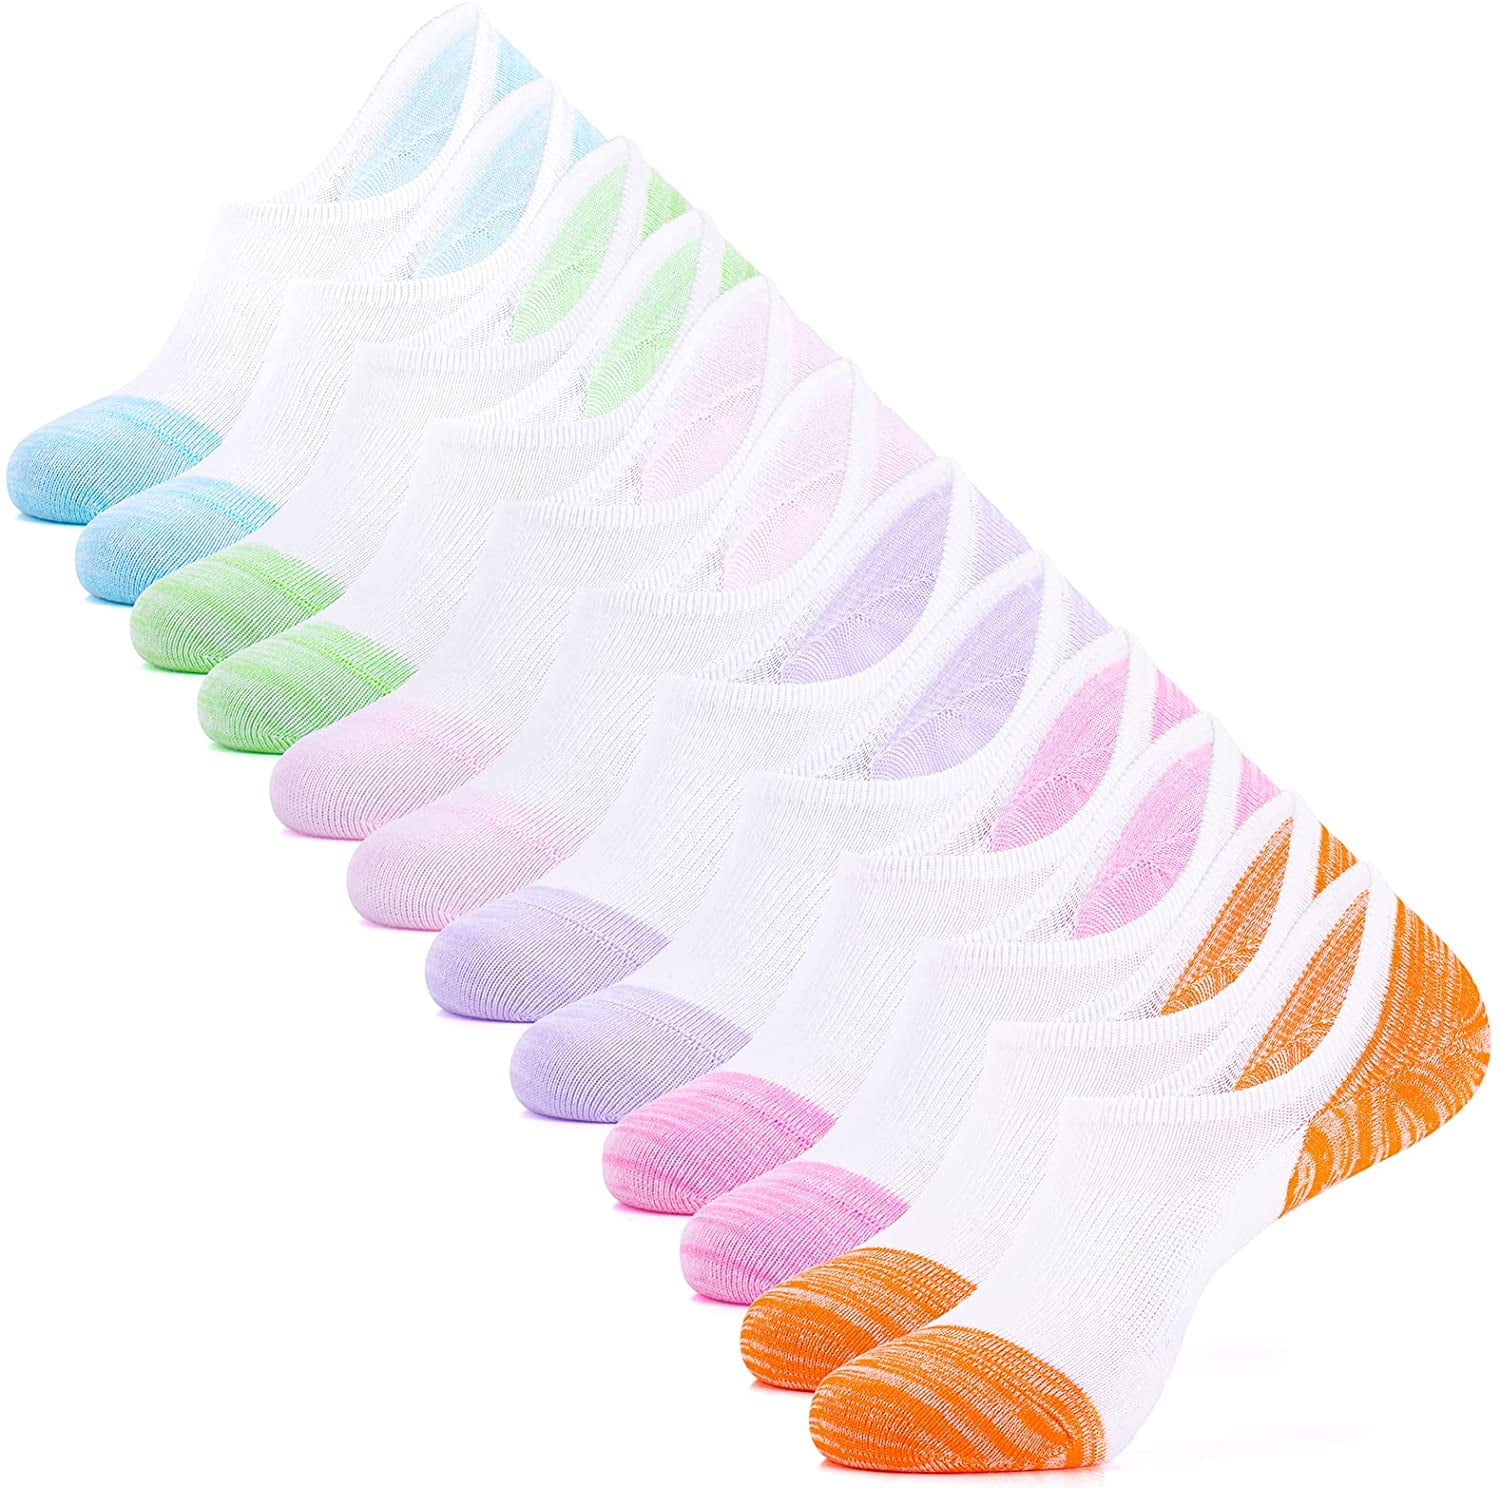 IDEGG No Show Socks Women 10 Pairs Low Cut Anti-Slid Novelty Athletic  Casual Invisible Liner Socks Color P - 10 Pairs - 10 Colors 5-9